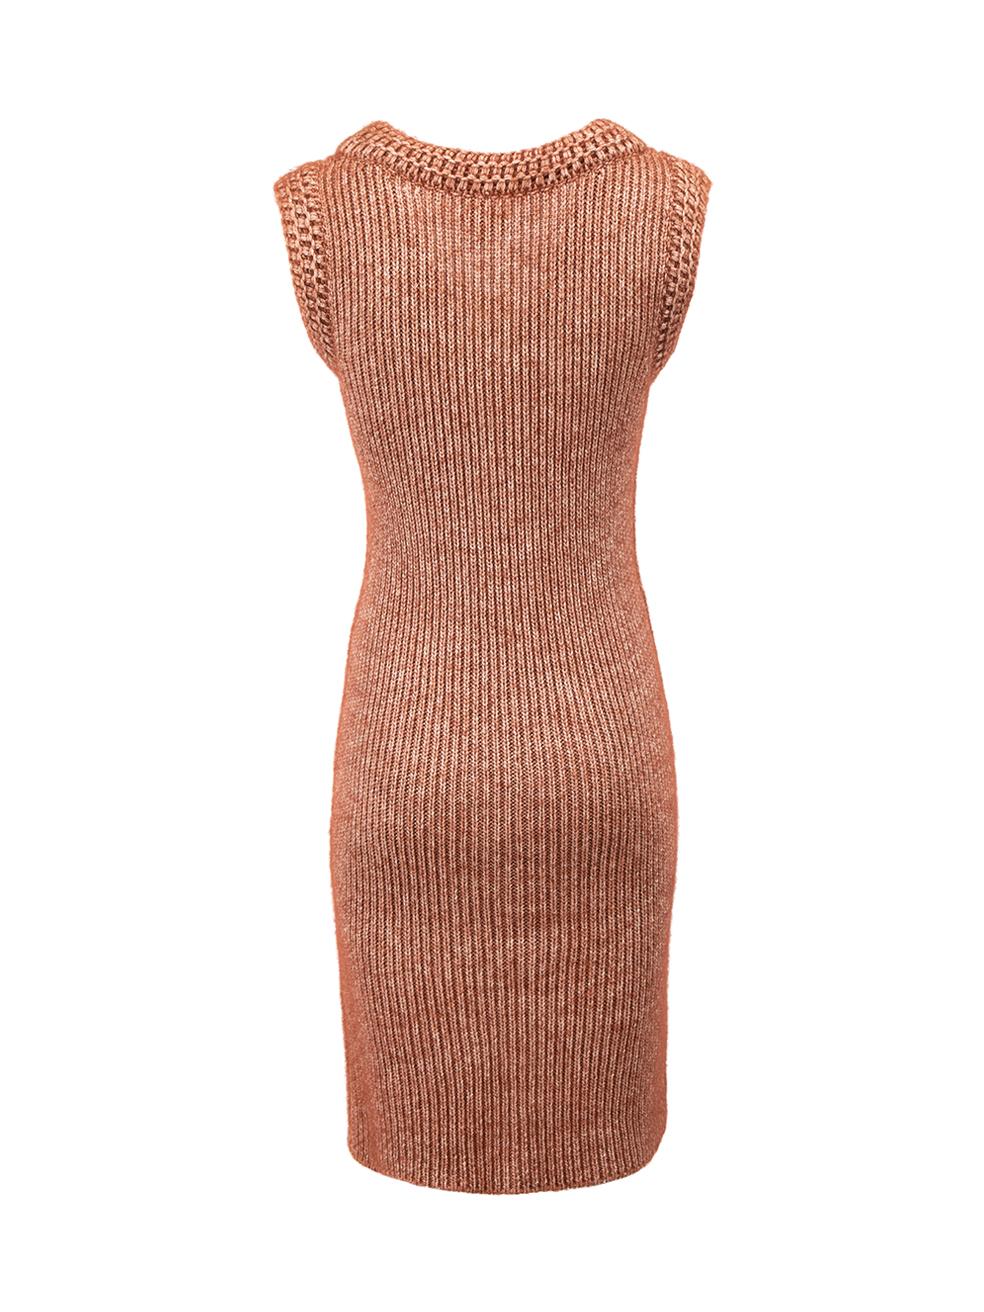 Fendi Brown Knit Sleeveless Dress Size XS In Good Condition In London, GB